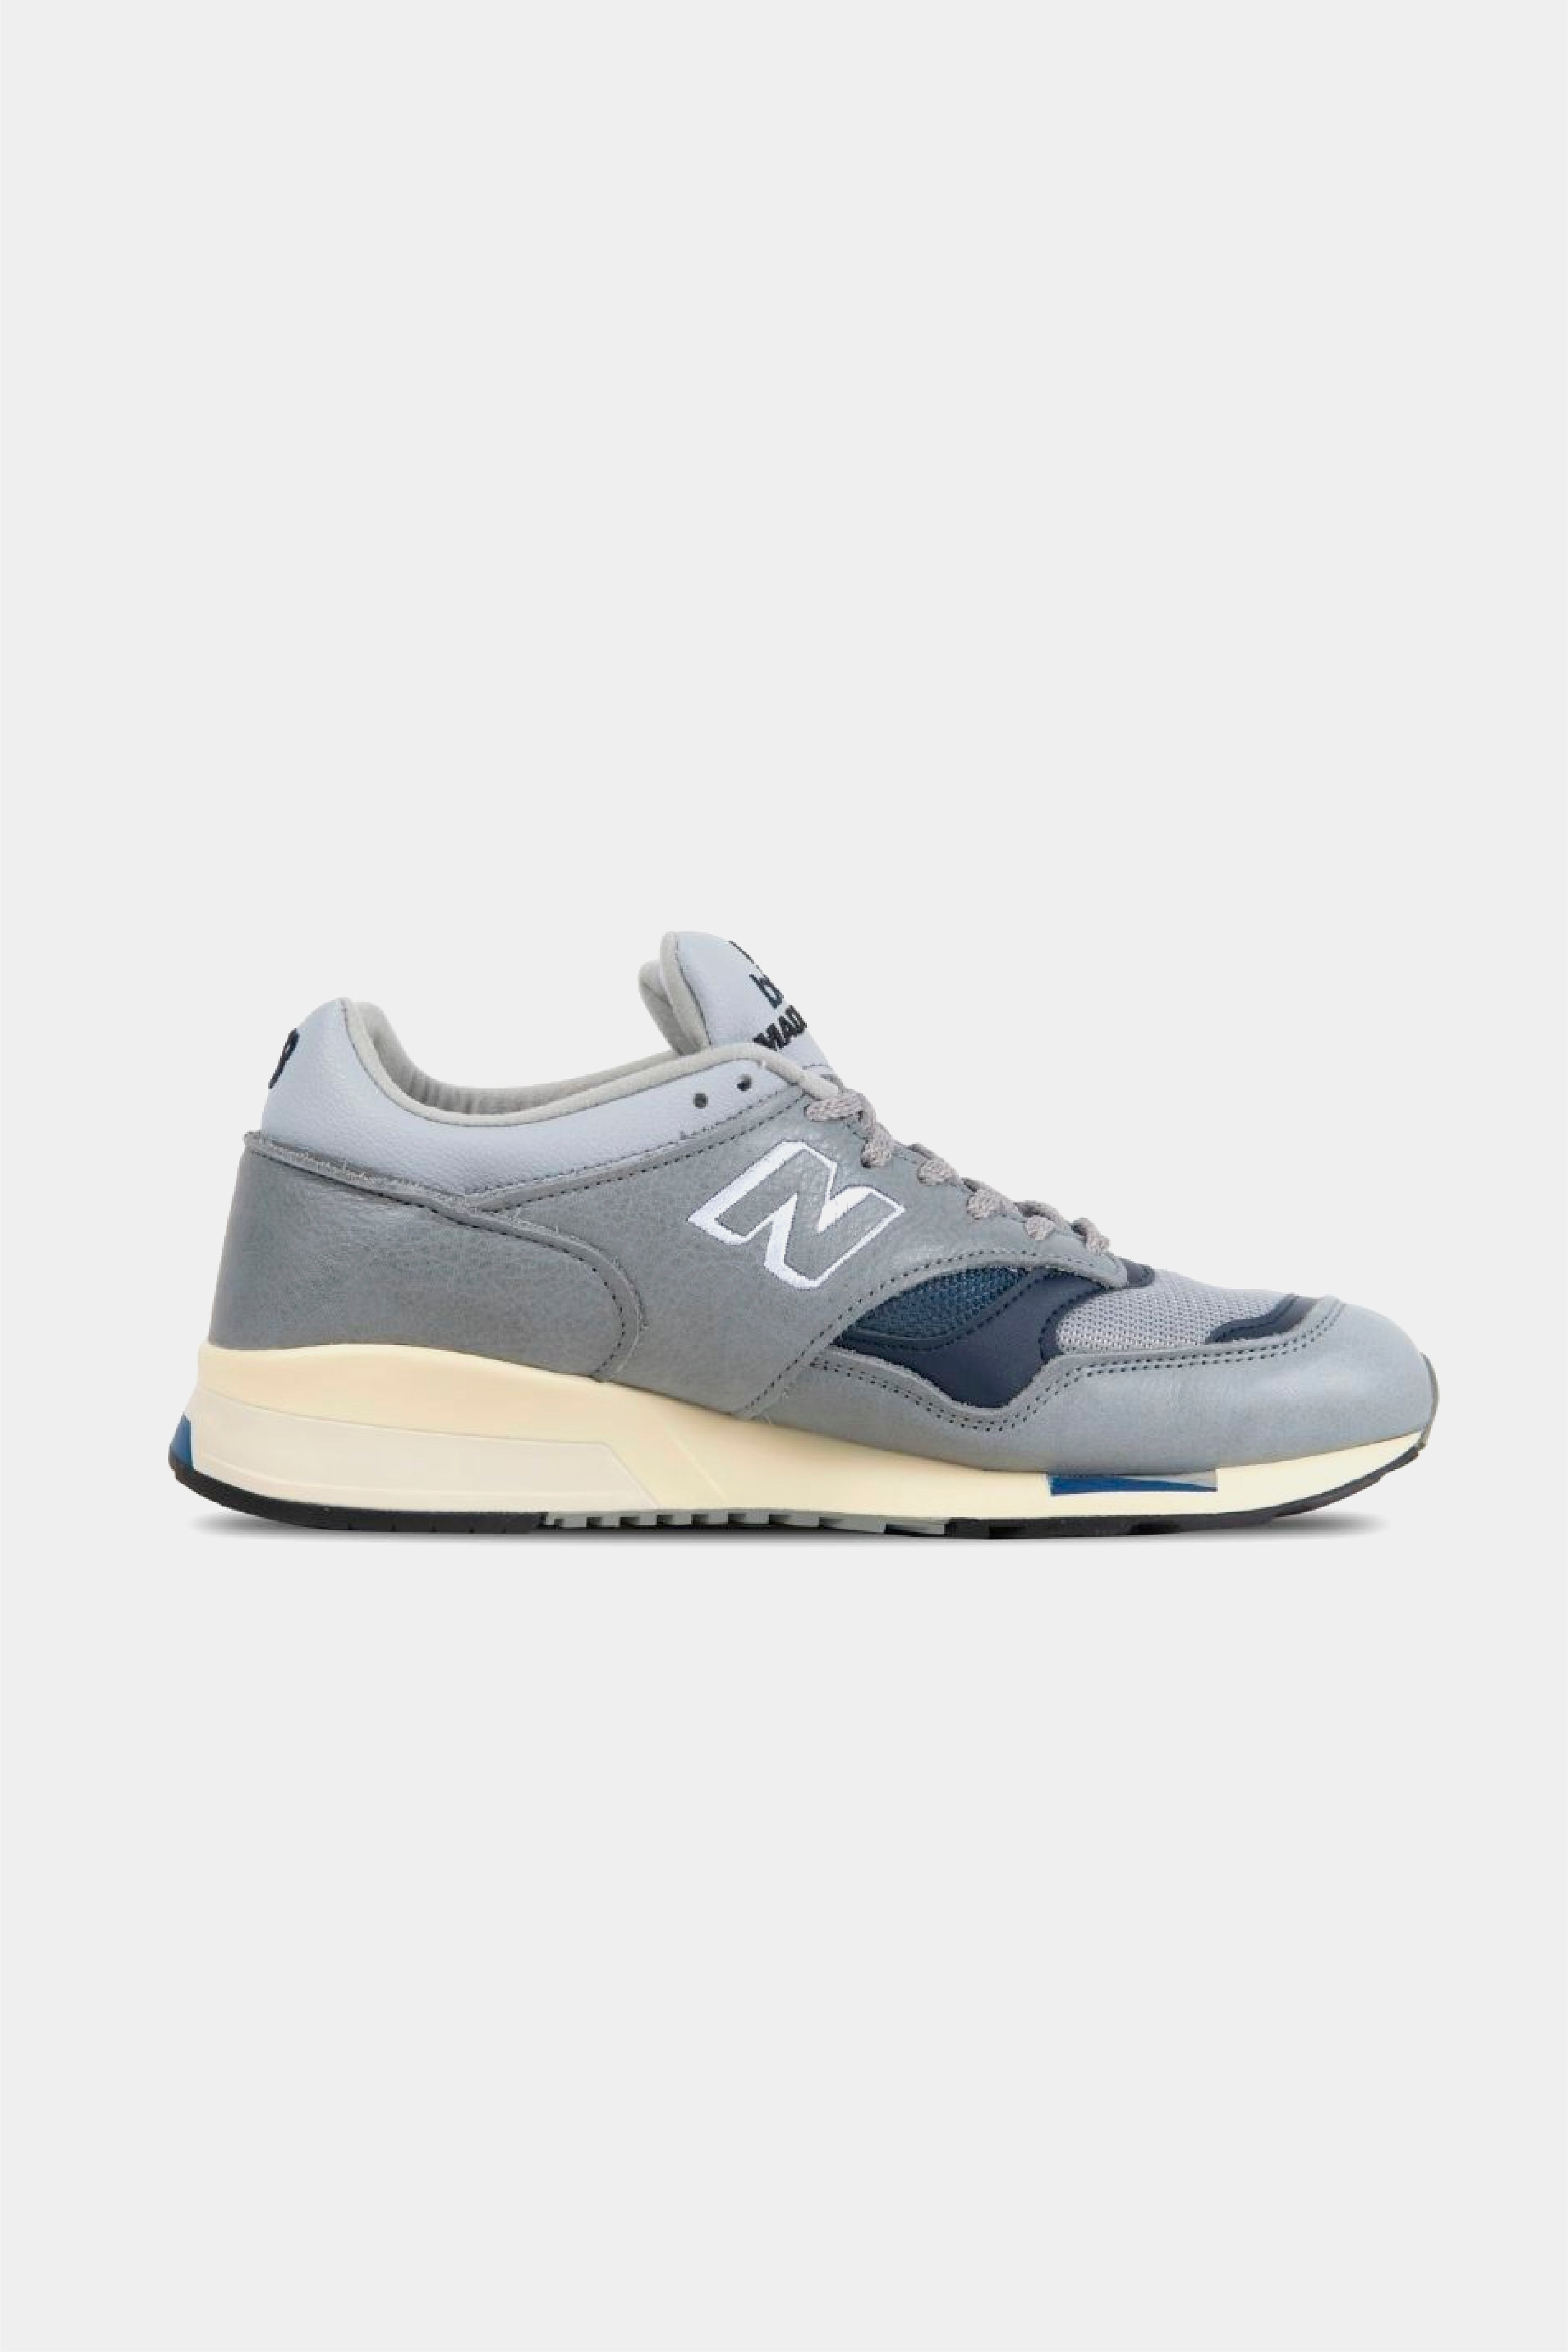 Selectshop FRAME - NEW BALANCE 1500 Made In UK "Blue And Grey" Footwear Concept Store Dubai